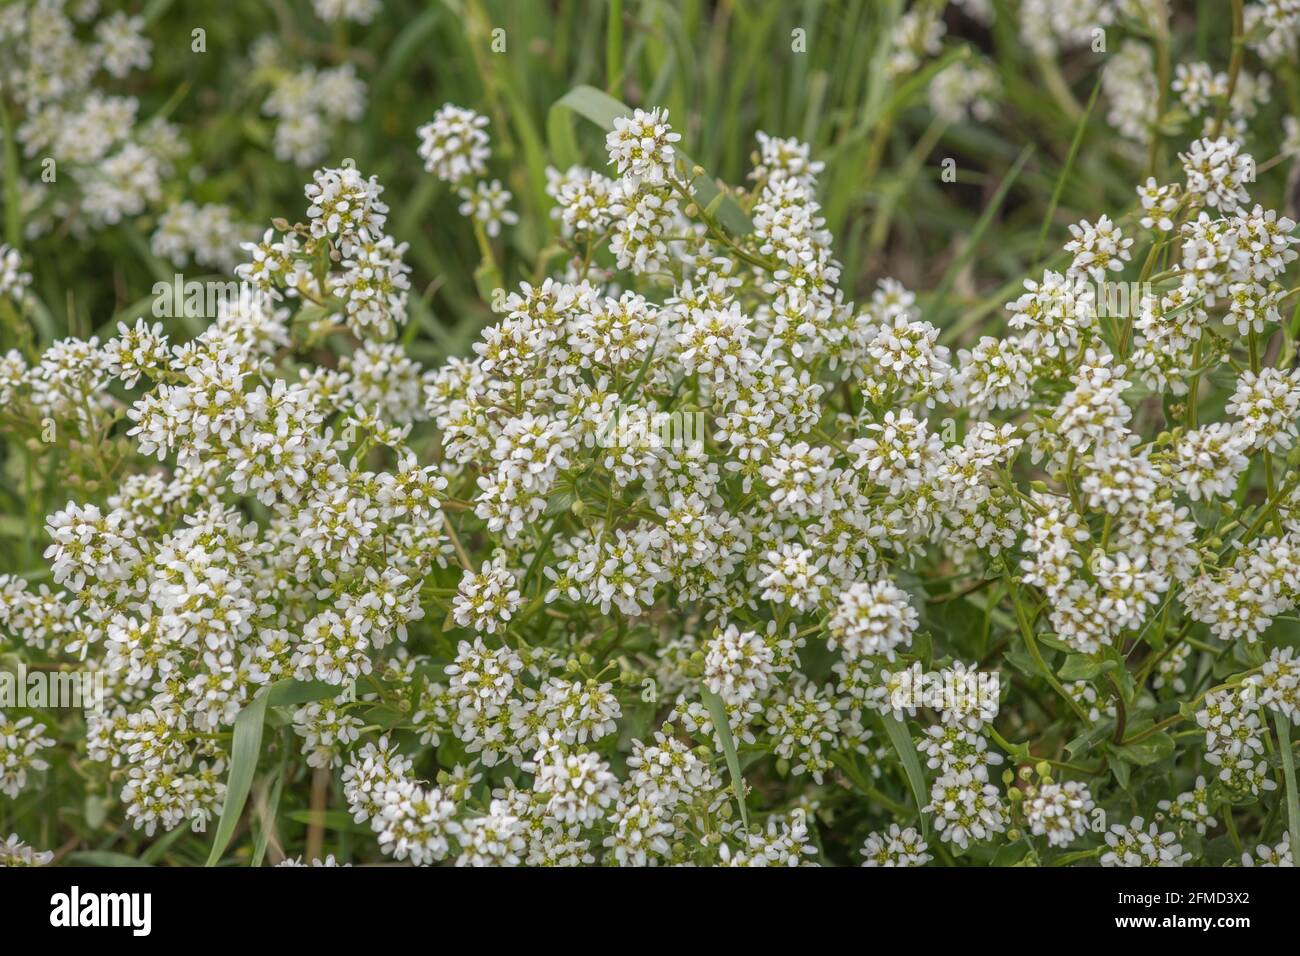 White flowers of Scurvy Grass / Cochlearia officinalis in salt marsh. Plant used to treat Scurvy as a vitamin C source. Traditional medicinal plants. Stock Photo